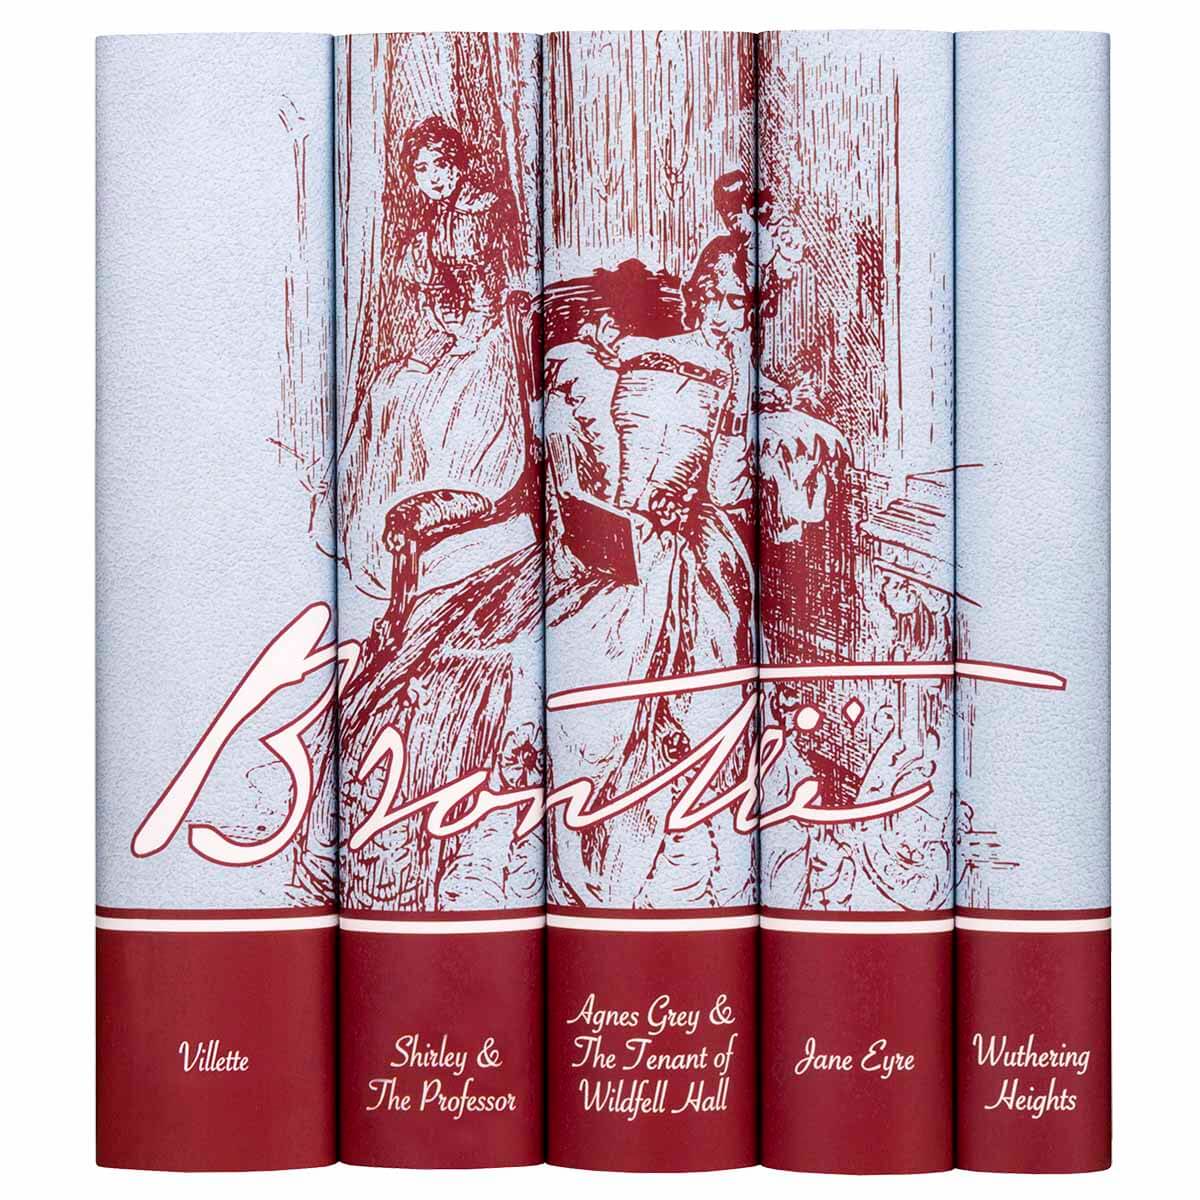 JuniperCustom curated classic literature wrapped in specialty art dust covers. Our book jackets highlight what you love about your favorite literary delights. Order your classic Bronte Sisters book curated collection today!